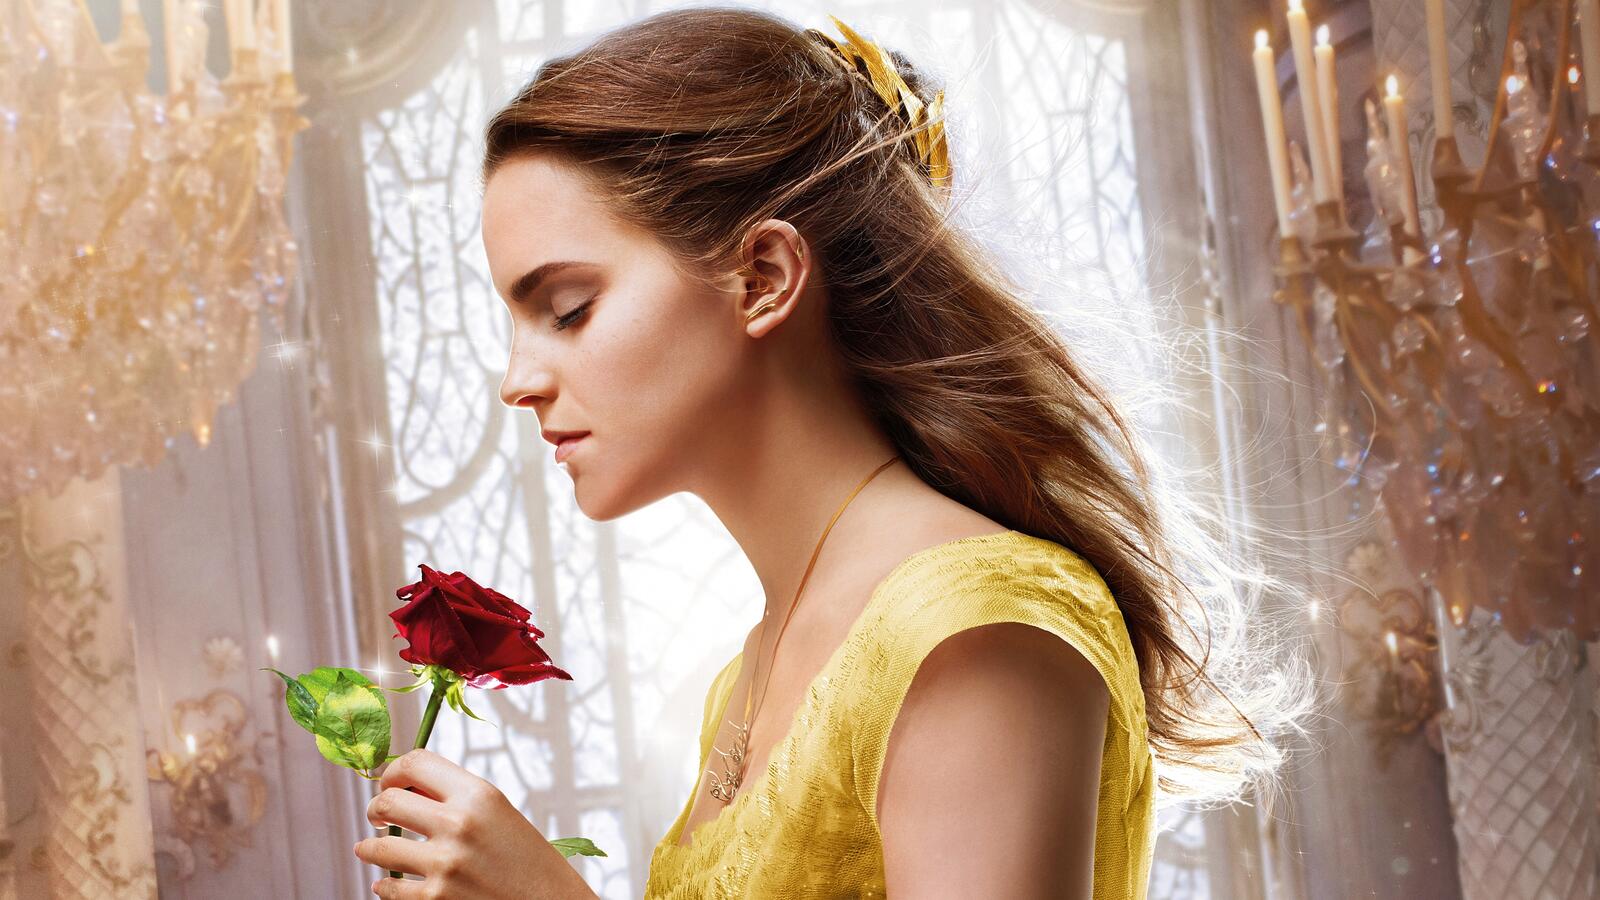 Free photo Emma Watson with a red rose in her hands